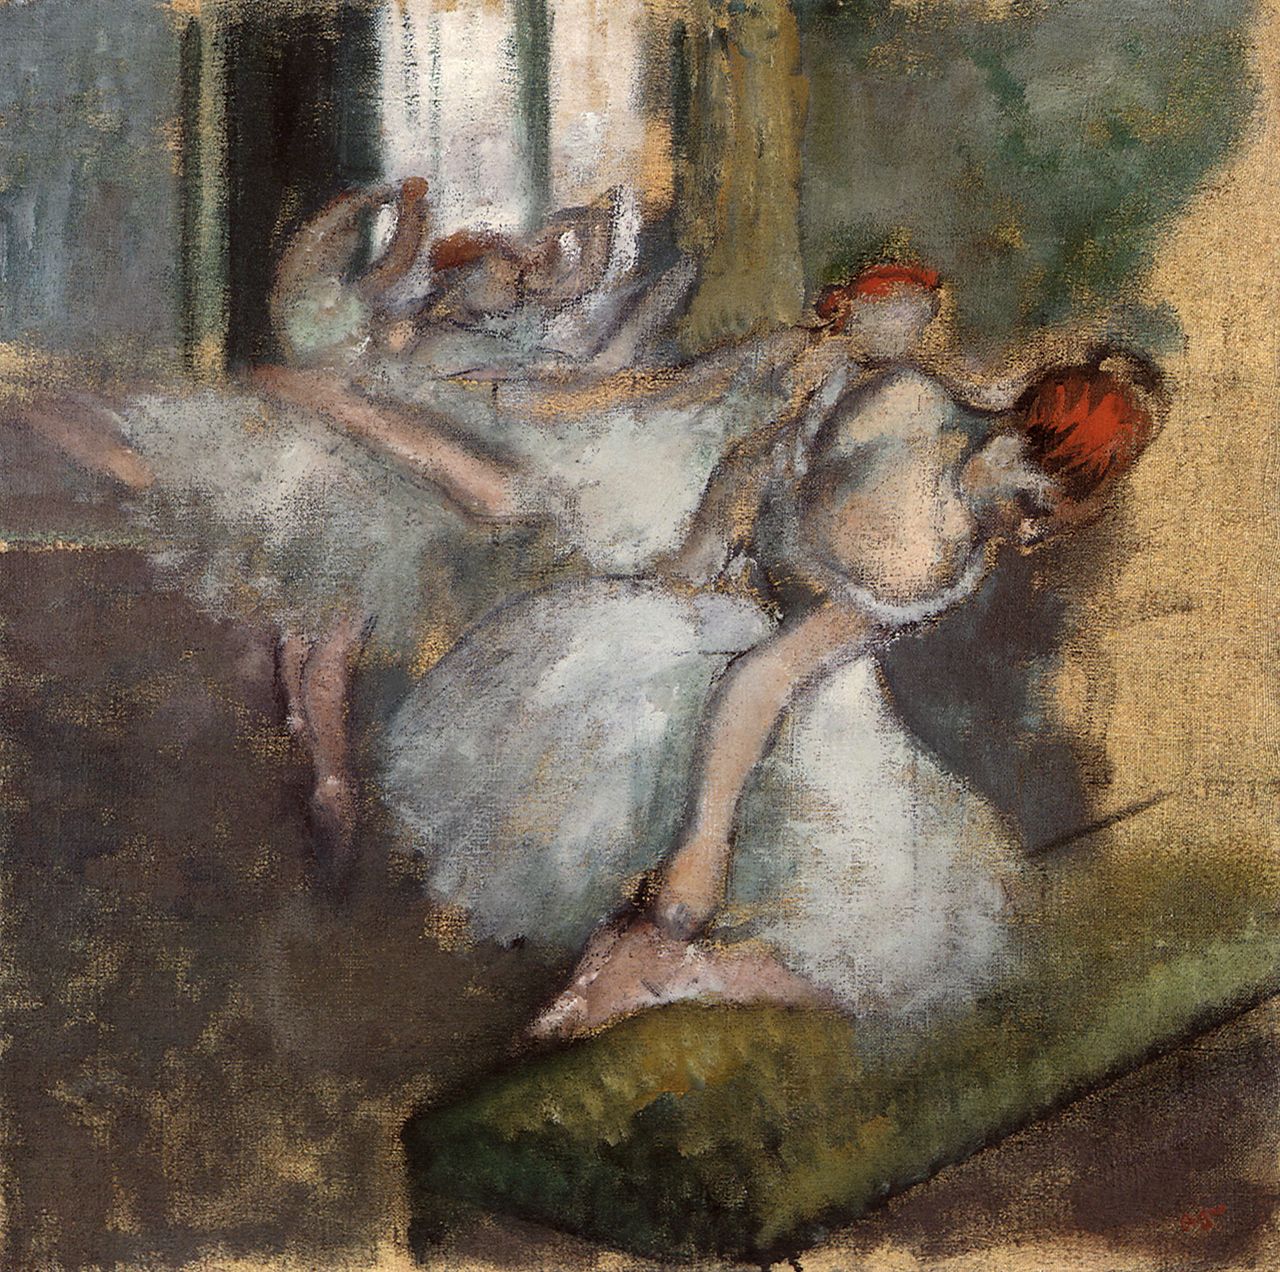 Degas’ odes to the Paris Opera have taken on the rosy glow of nostalgia, but when he painted his subjects, he saw neither budding talent nor charming naiveté.